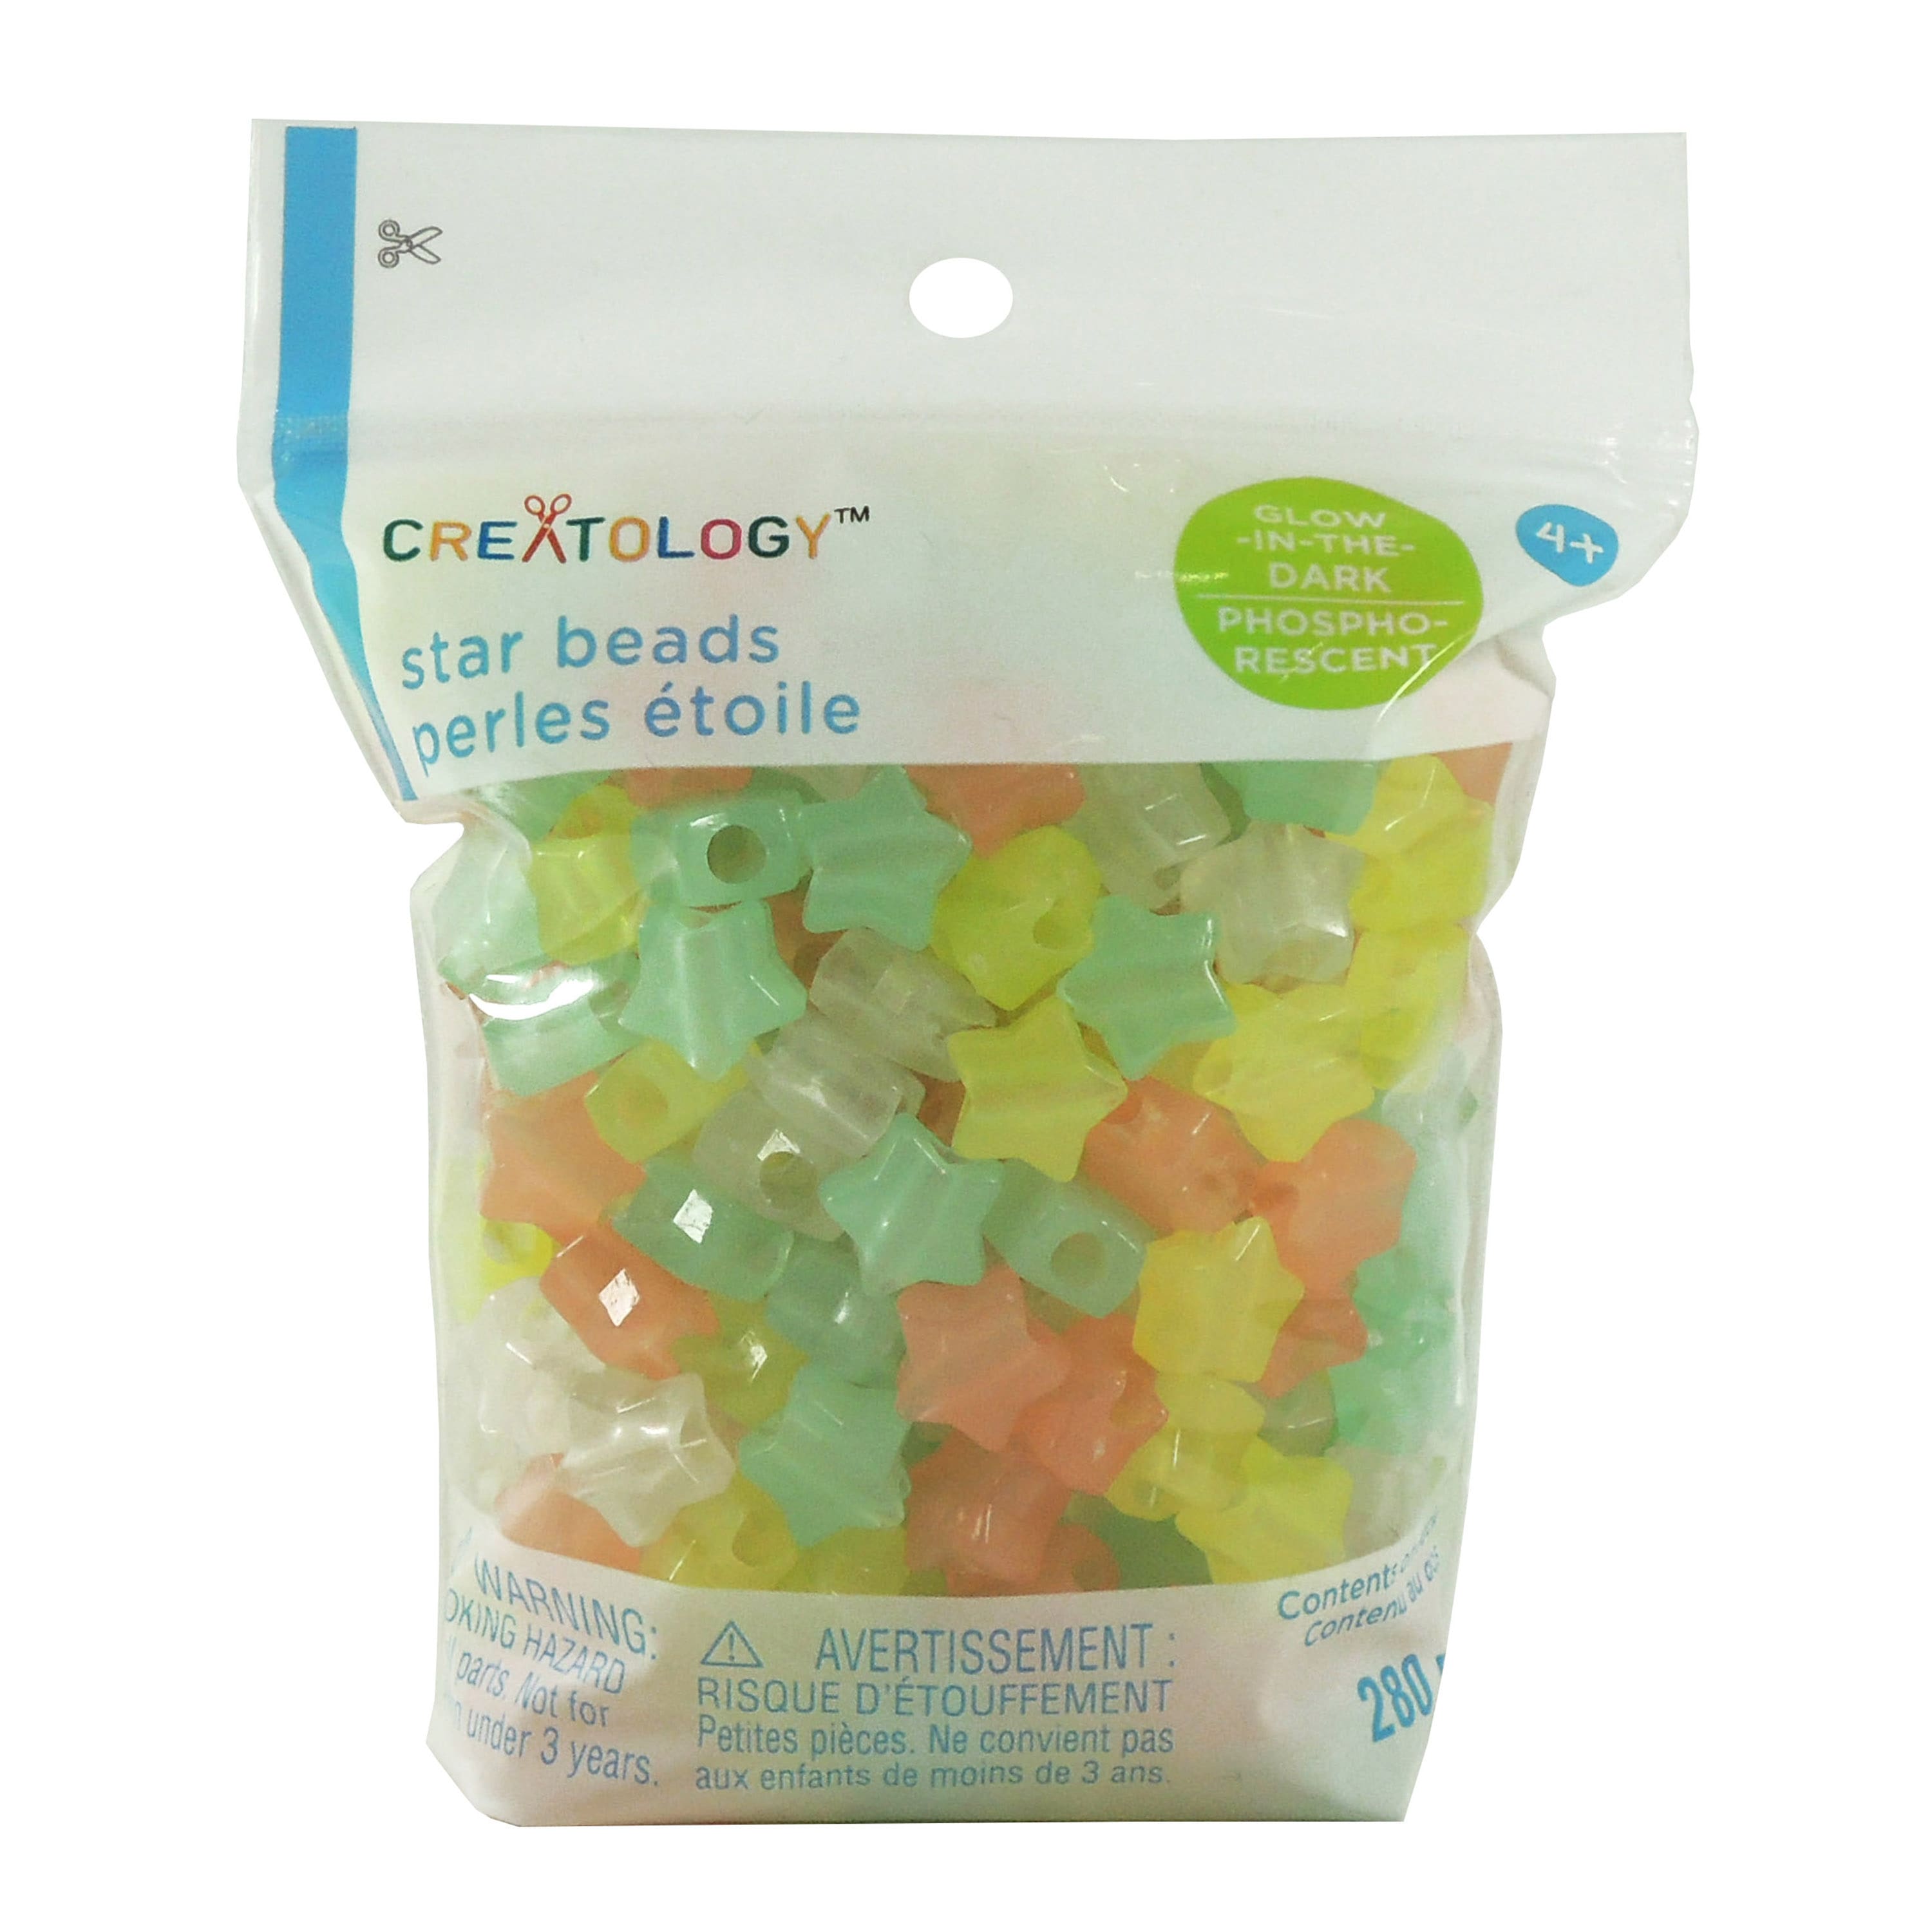 12 Packs: 60 ct. (720 total) Star Beads by Creatology™ 